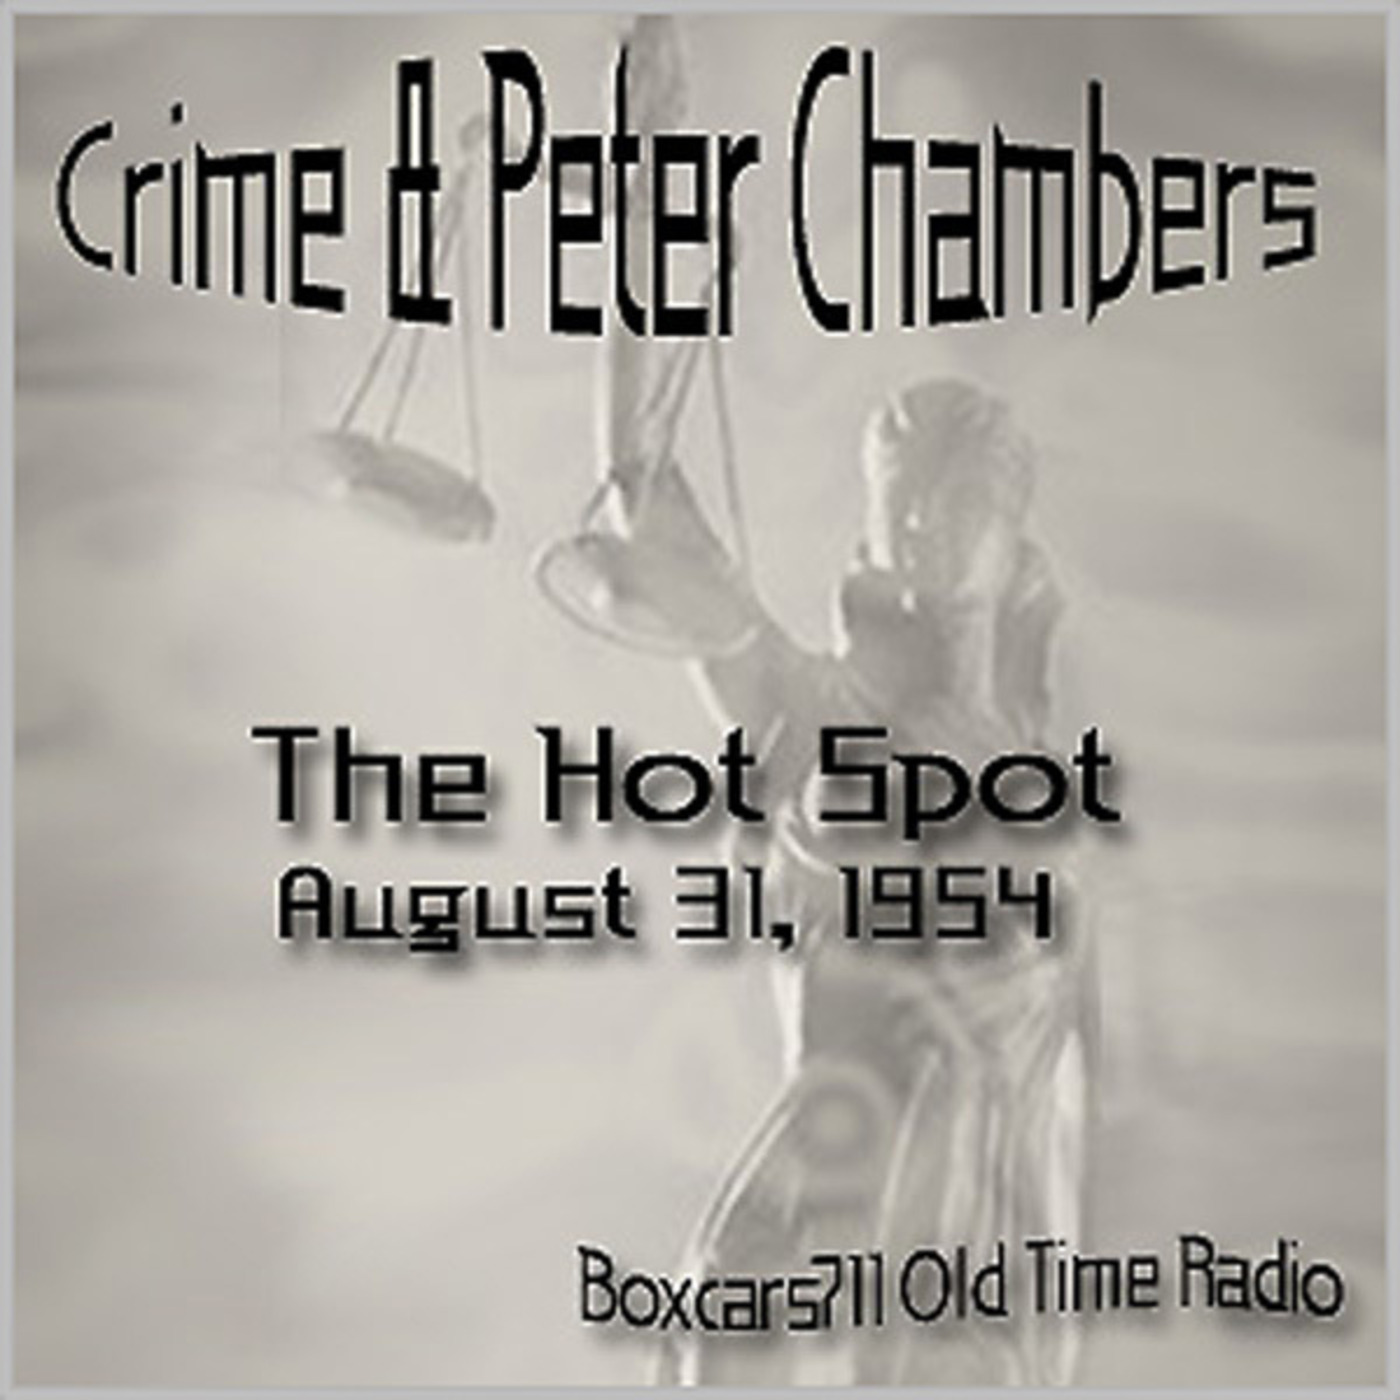 Episode 9623: Crime & Peter Chambers - 